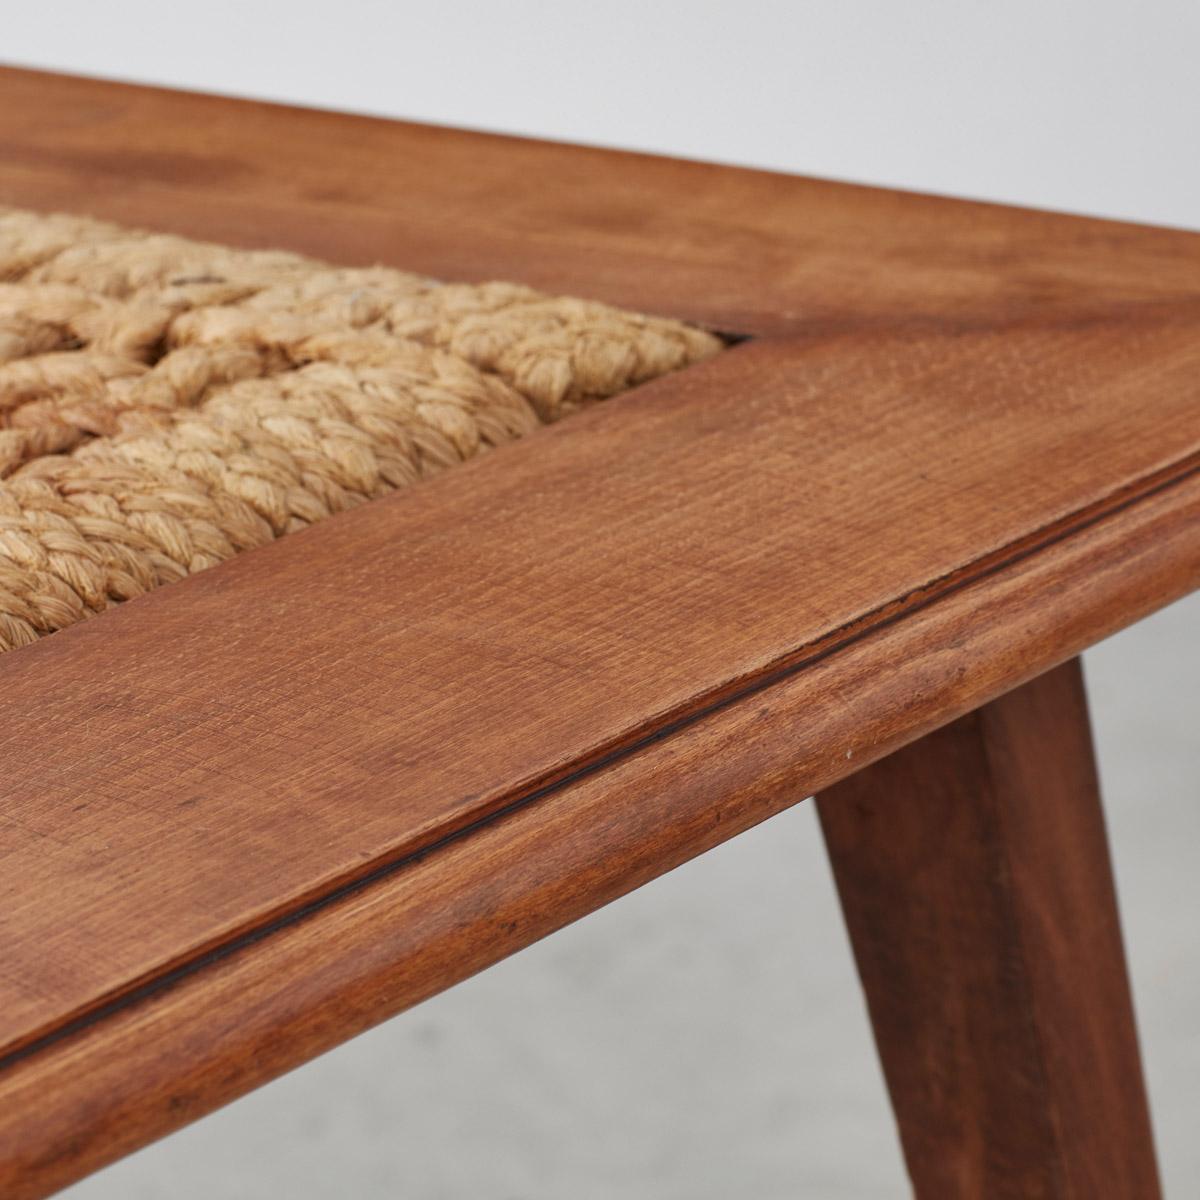 Seagrass Audoux Minet Rope Coffee Table Vibo Vesoul, France, 1940s For Sale